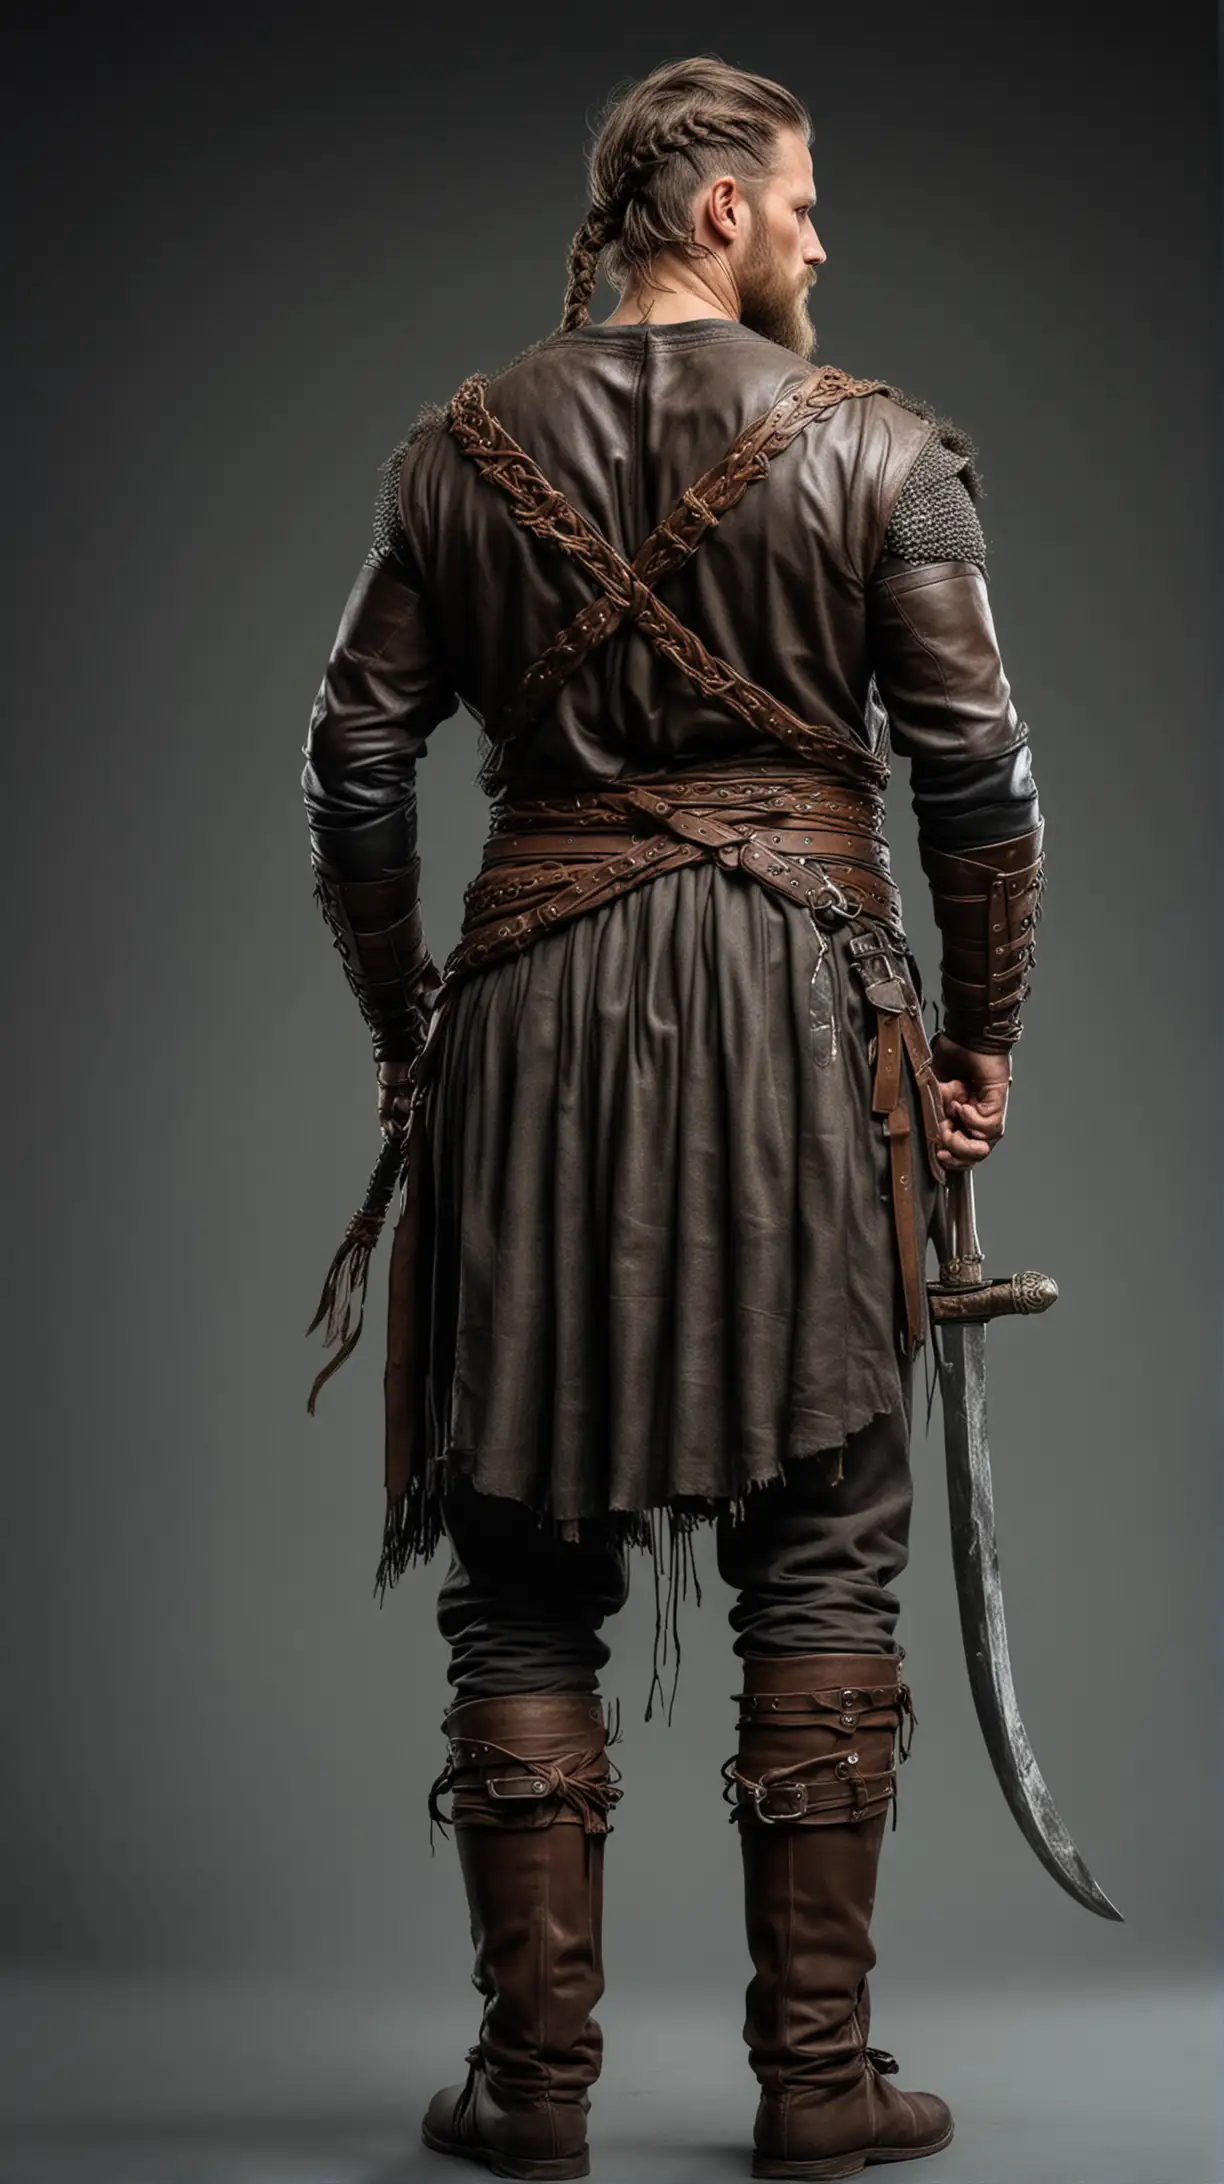 muscular viking warrior, back view, head facing fully forward, no side or face shown, full body, short dark hair tied in knot, viking clothes and weapons, leather sleeves